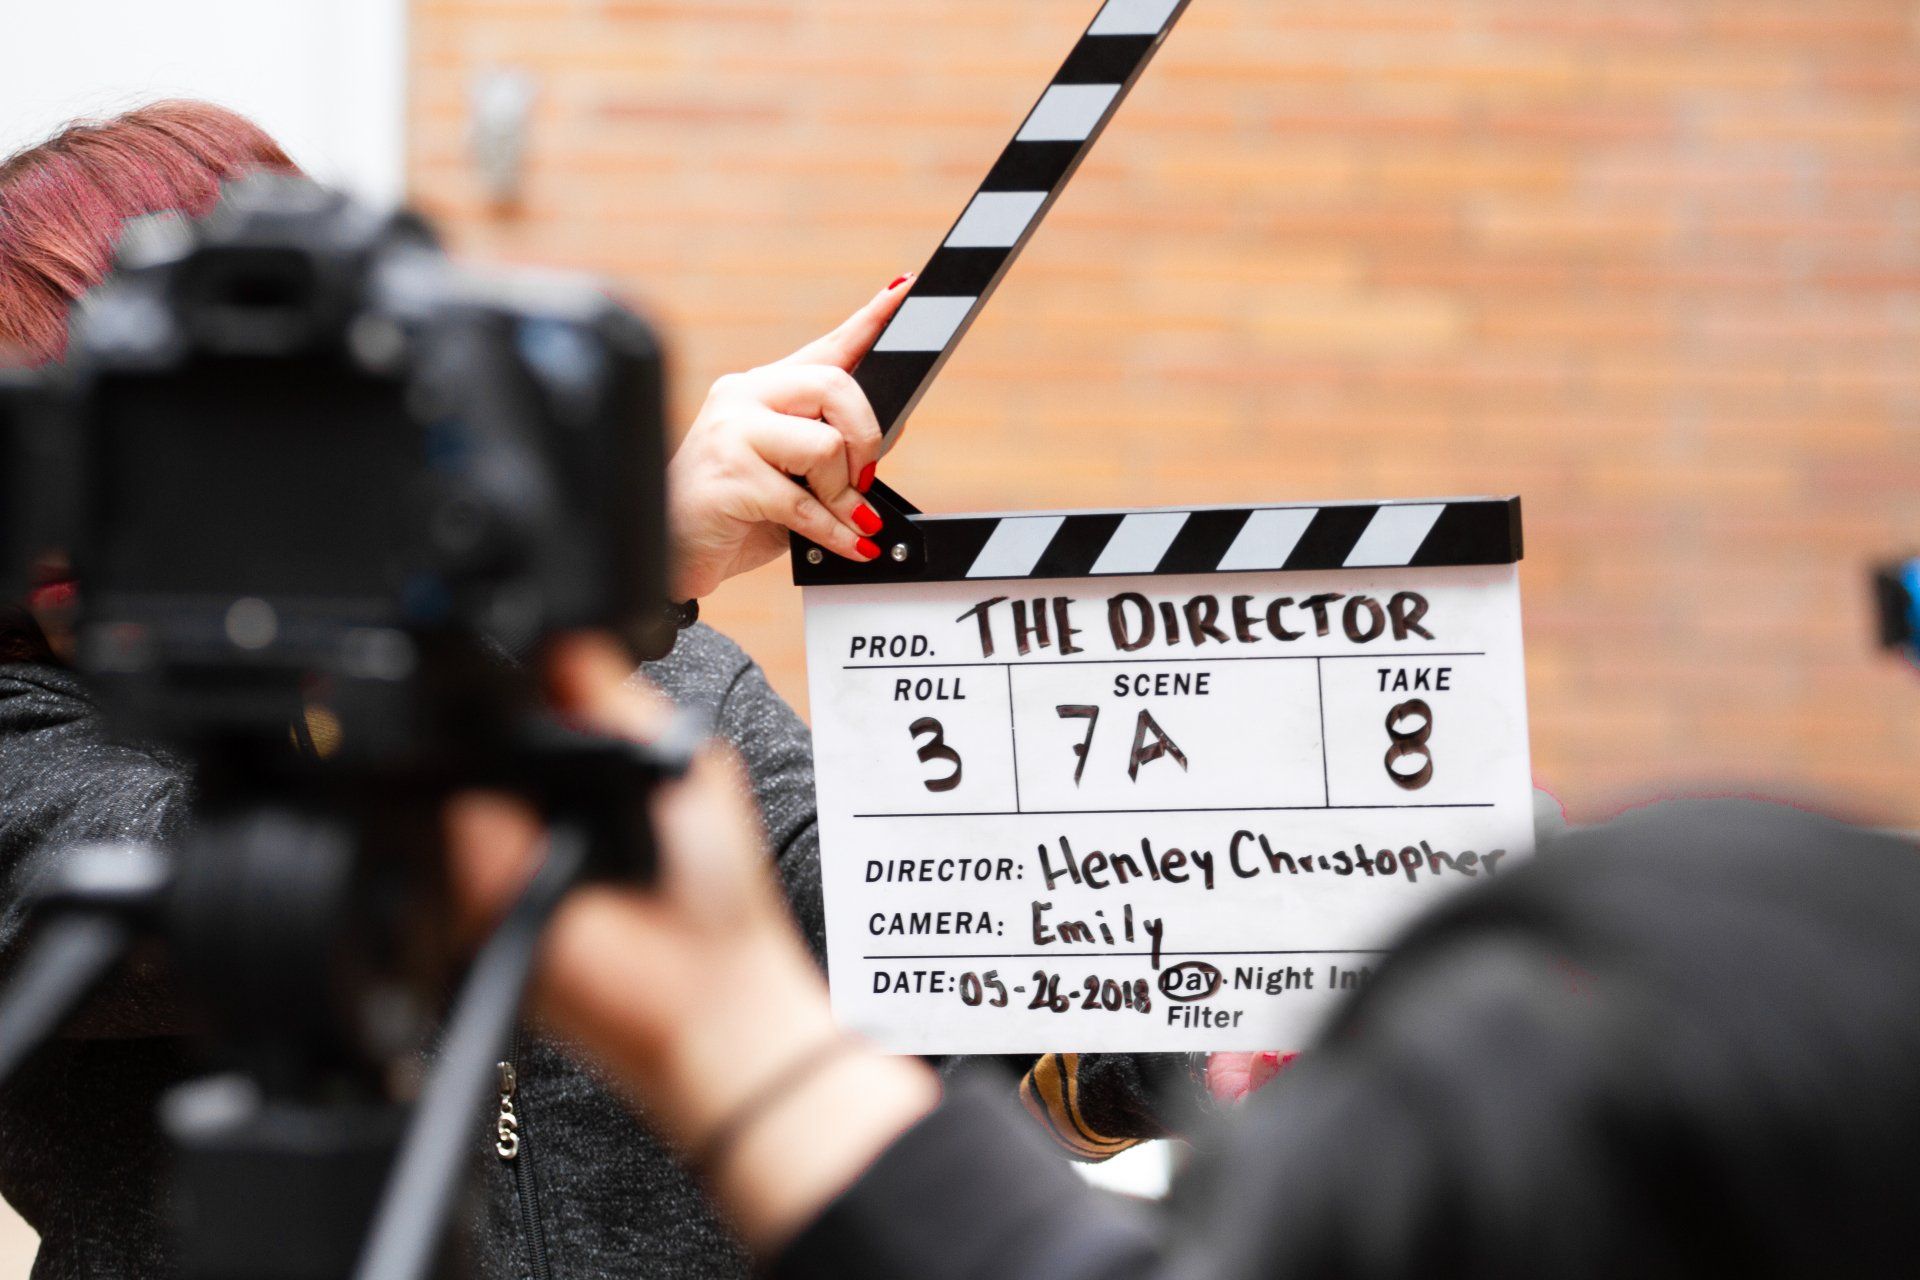 Image of a movie clapperboard